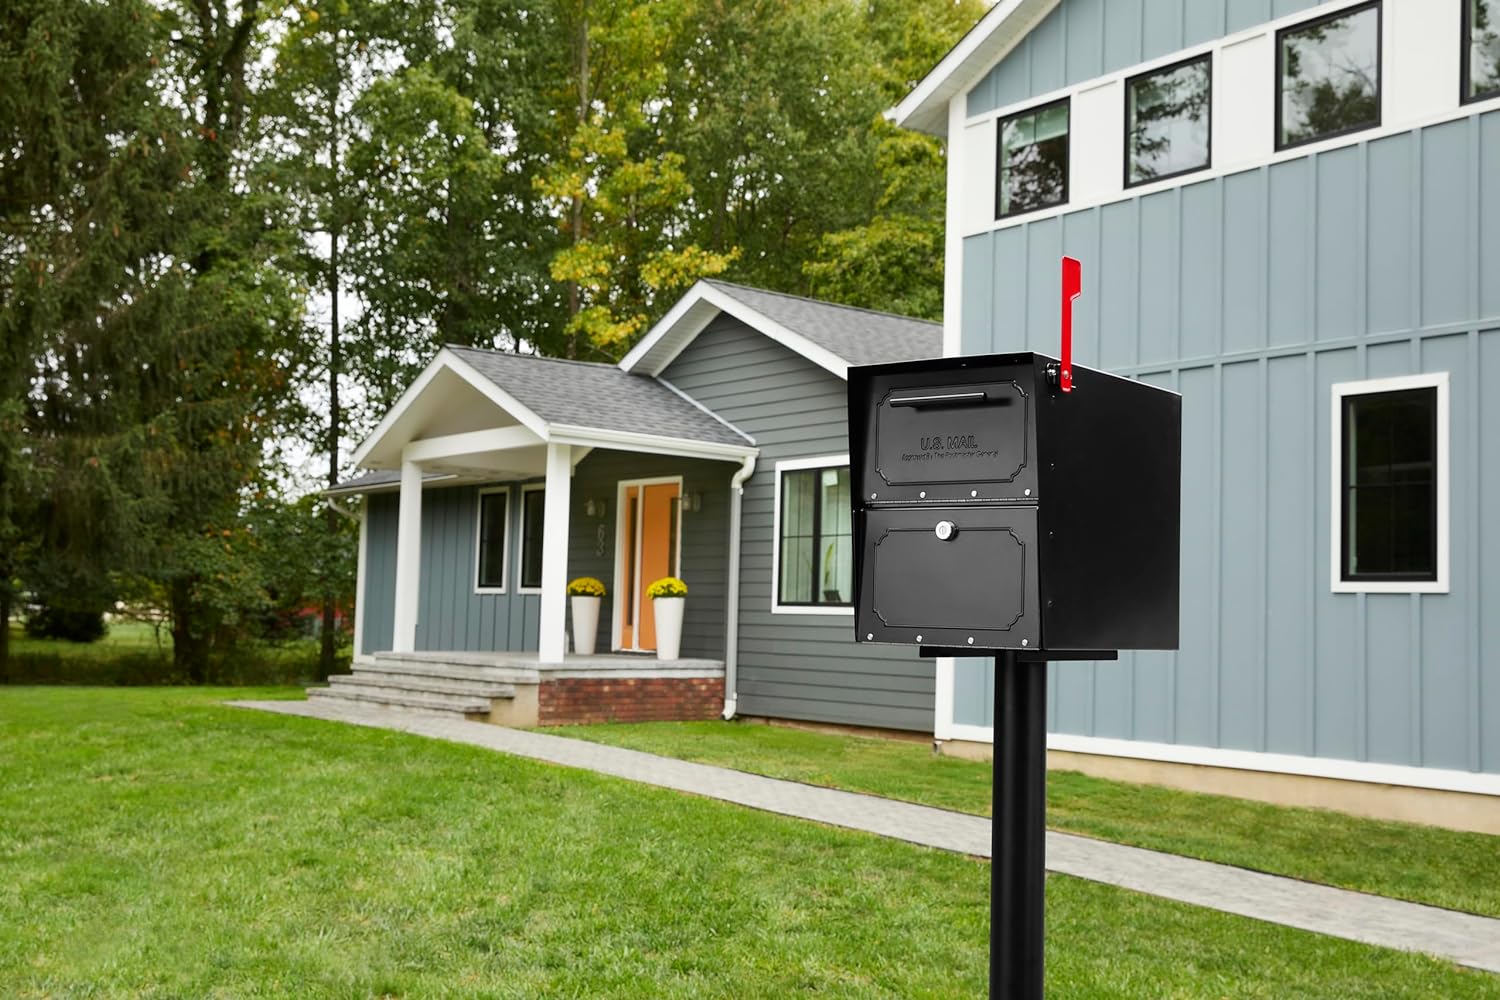 Architectural Mailboxes Oasis Classic Locking Post Mount Parcel Mailbox